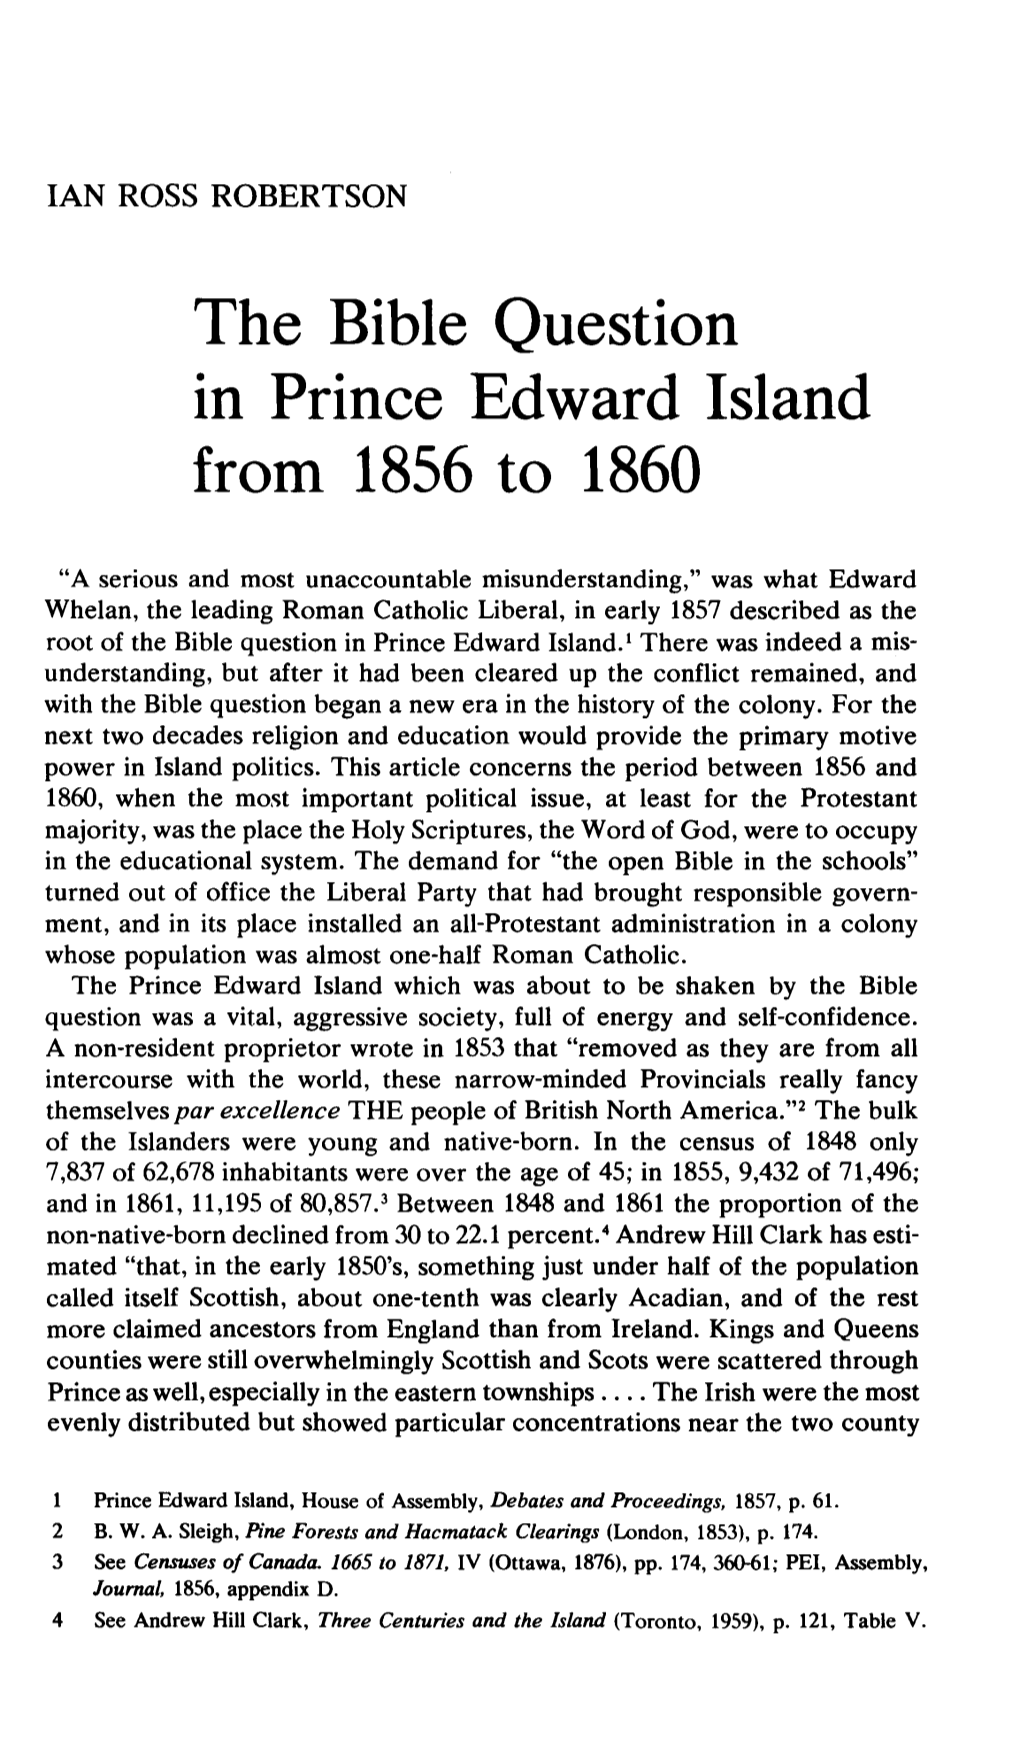 The Bible Question in Prince Edward Island from 1856 to 1860